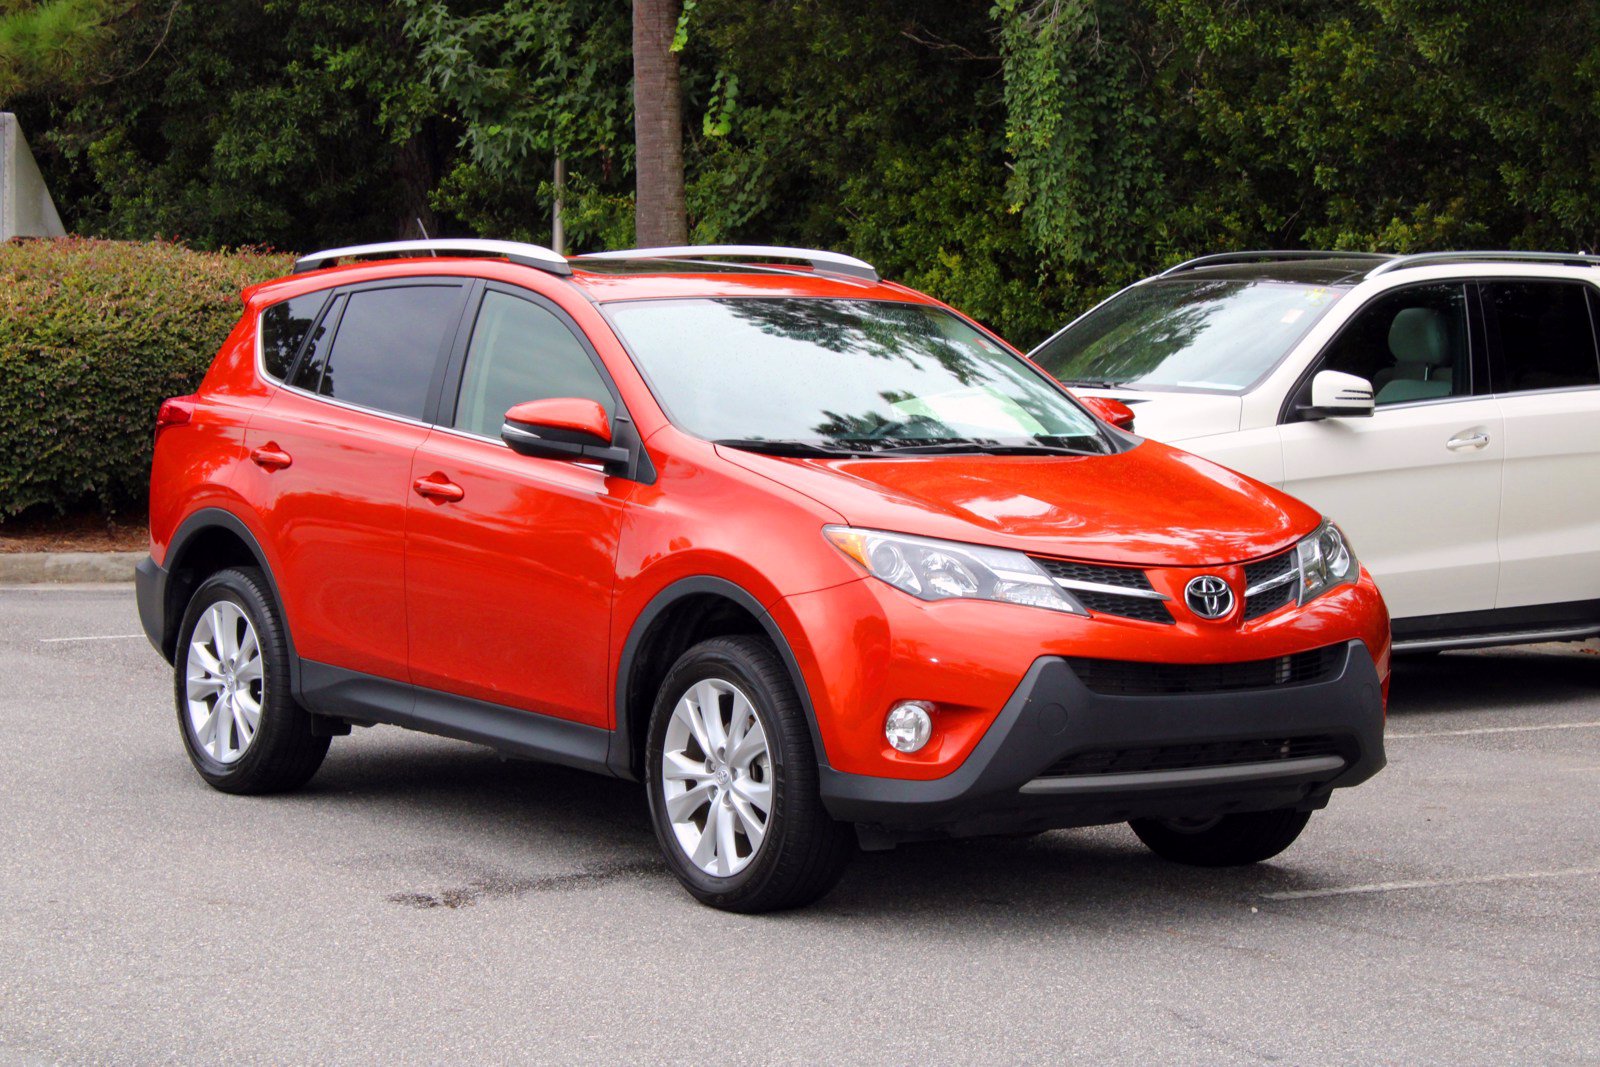 PreOwned 2015 Toyota RAV4 Limited FWD 4D Sport Utility